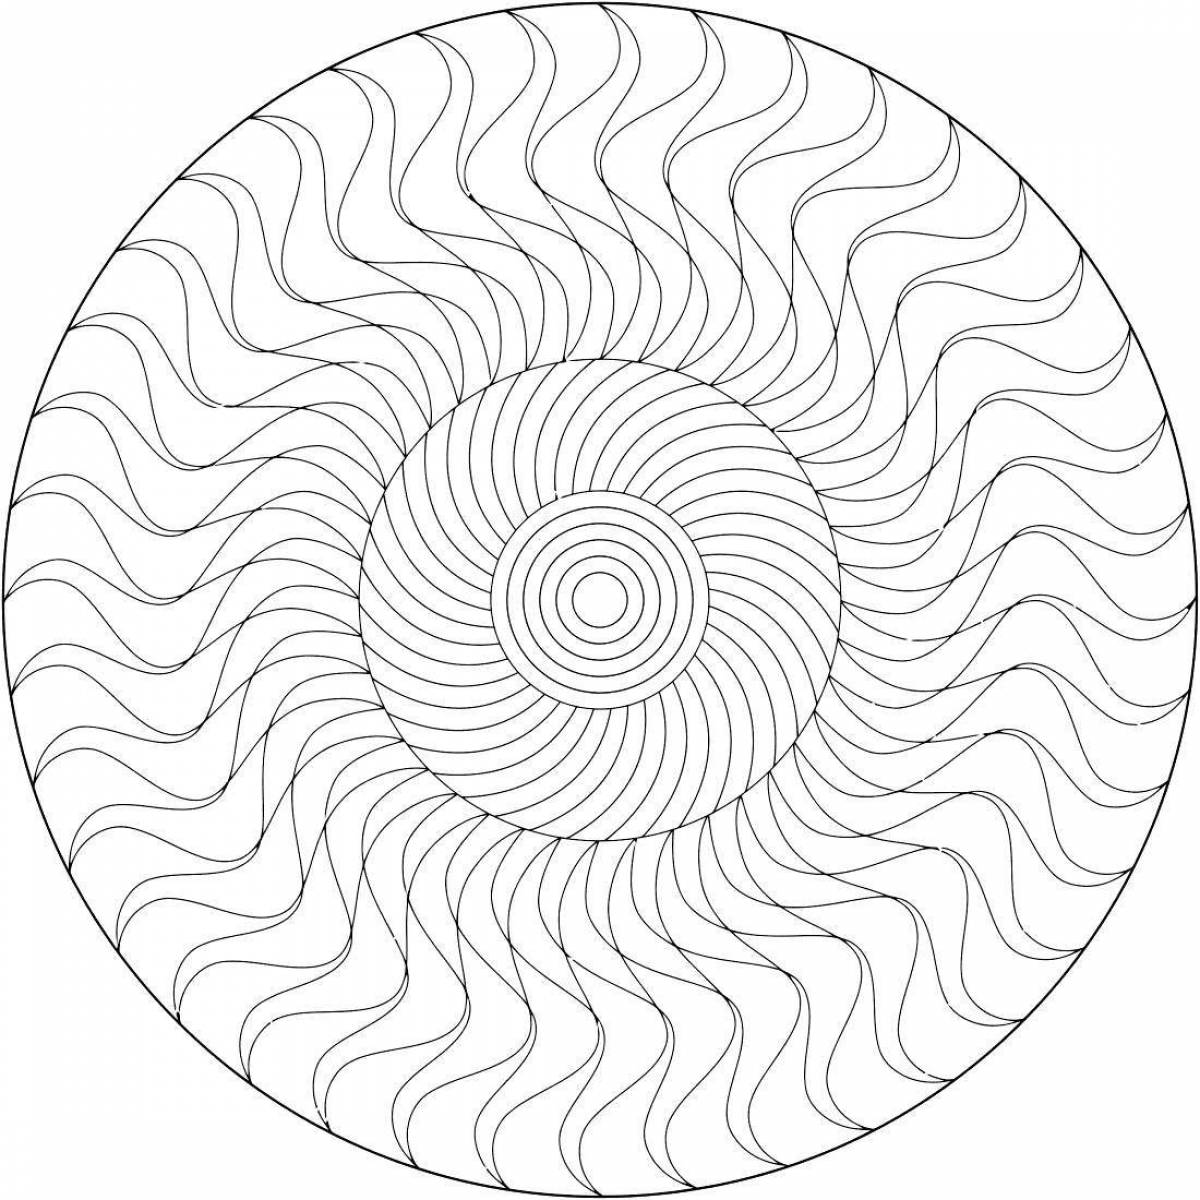 Serene antistress spirals coloring page